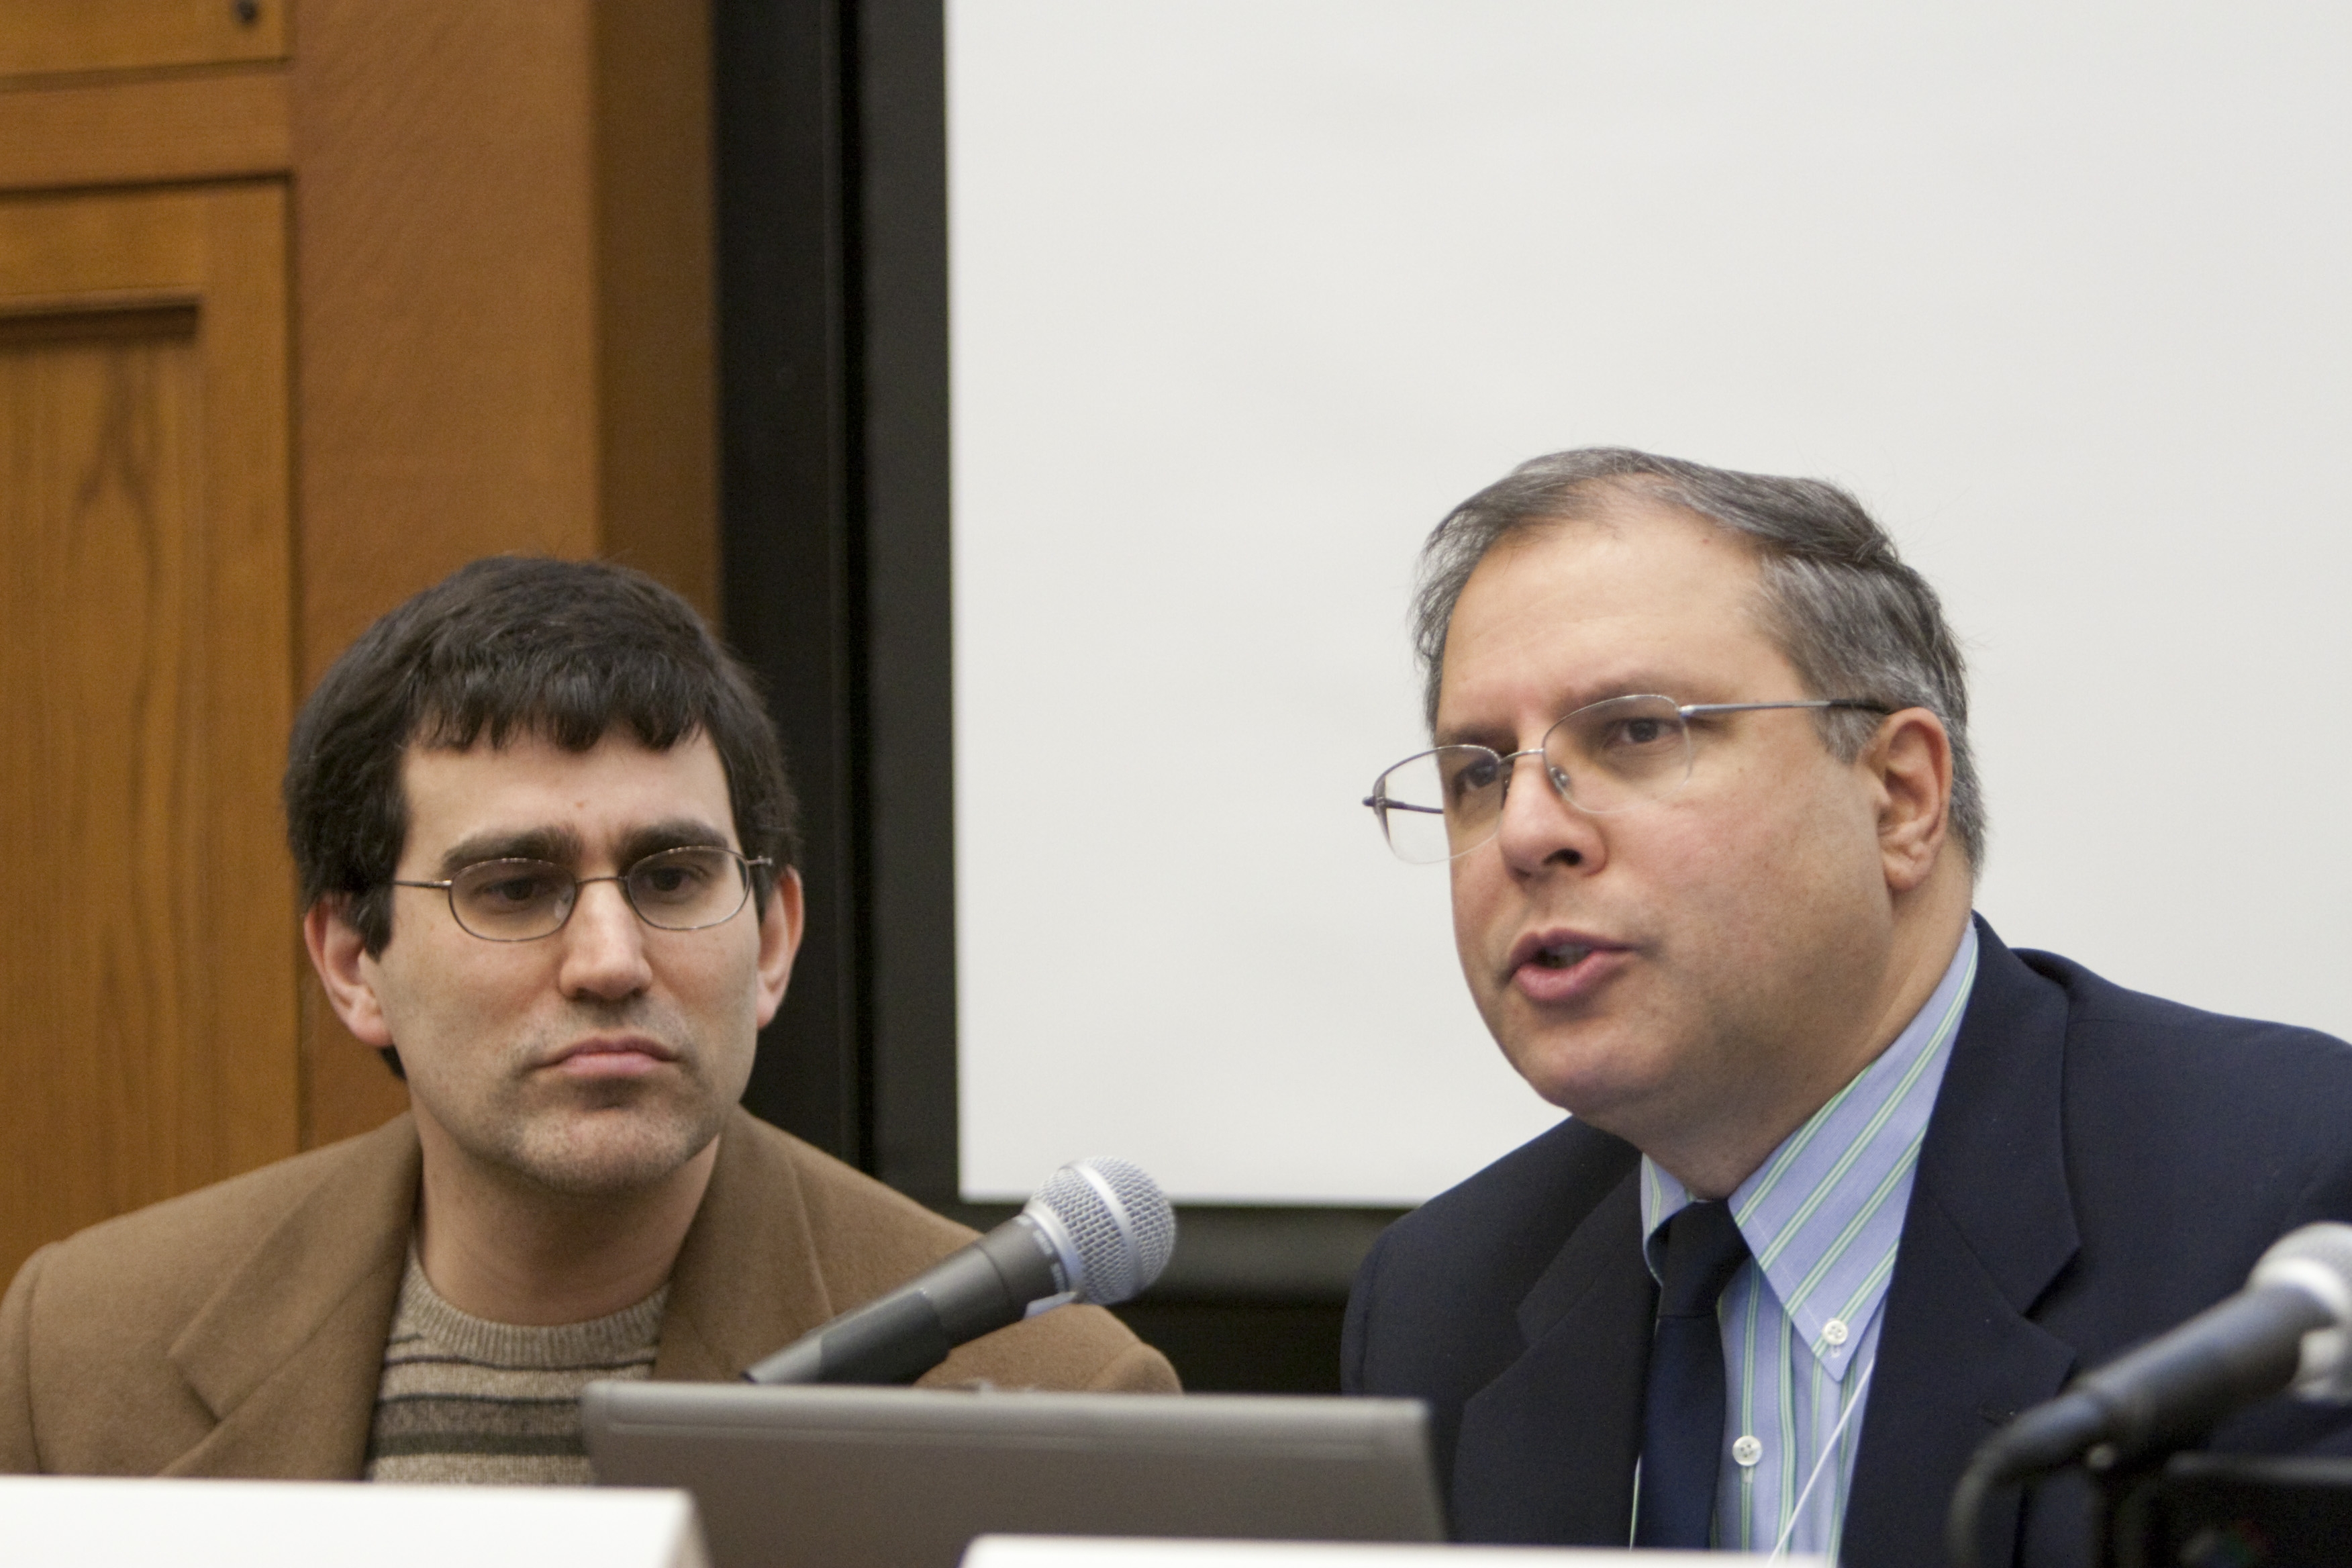 Yale SOM Prof. Andrew Metrick and Chicago Booth Prof. Anil Kashyap